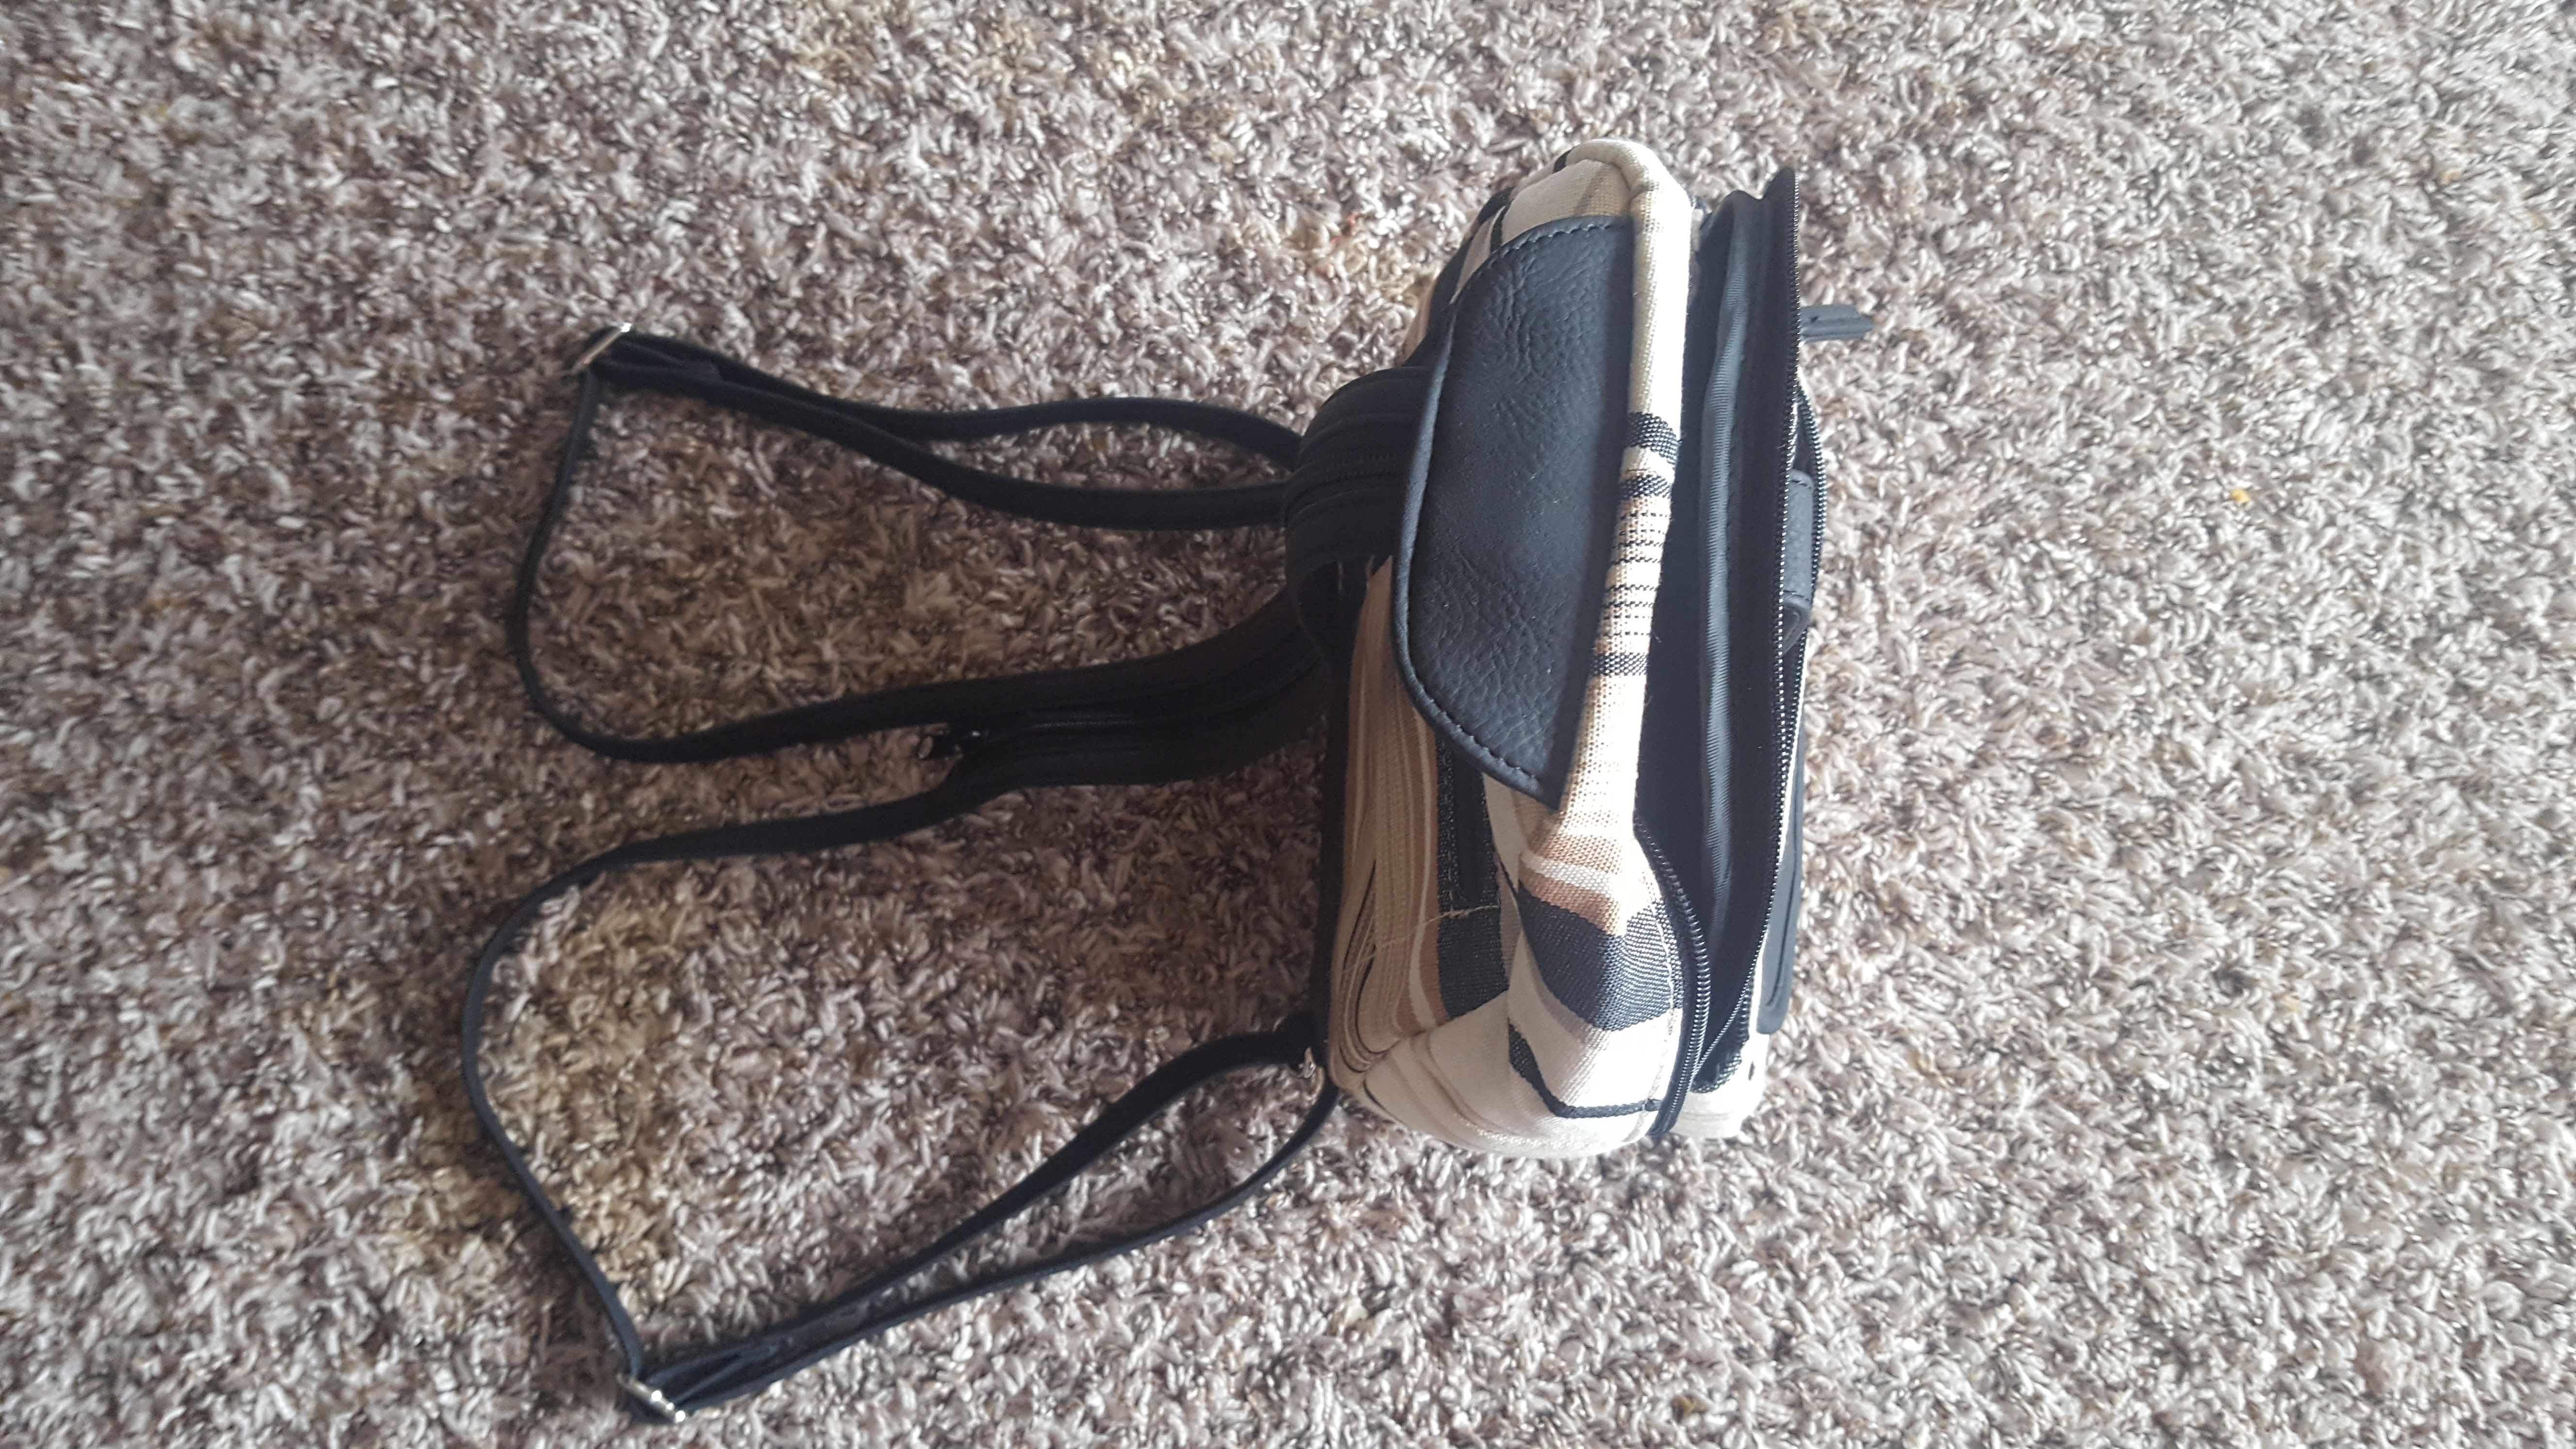 MultiSac Backpack for Sale in Vancouver, WA - OfferUp